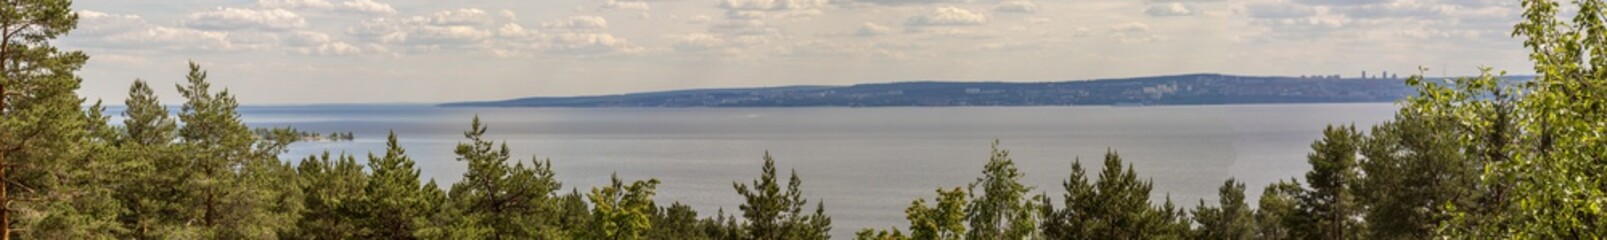 Panorama of the lake from the mountain